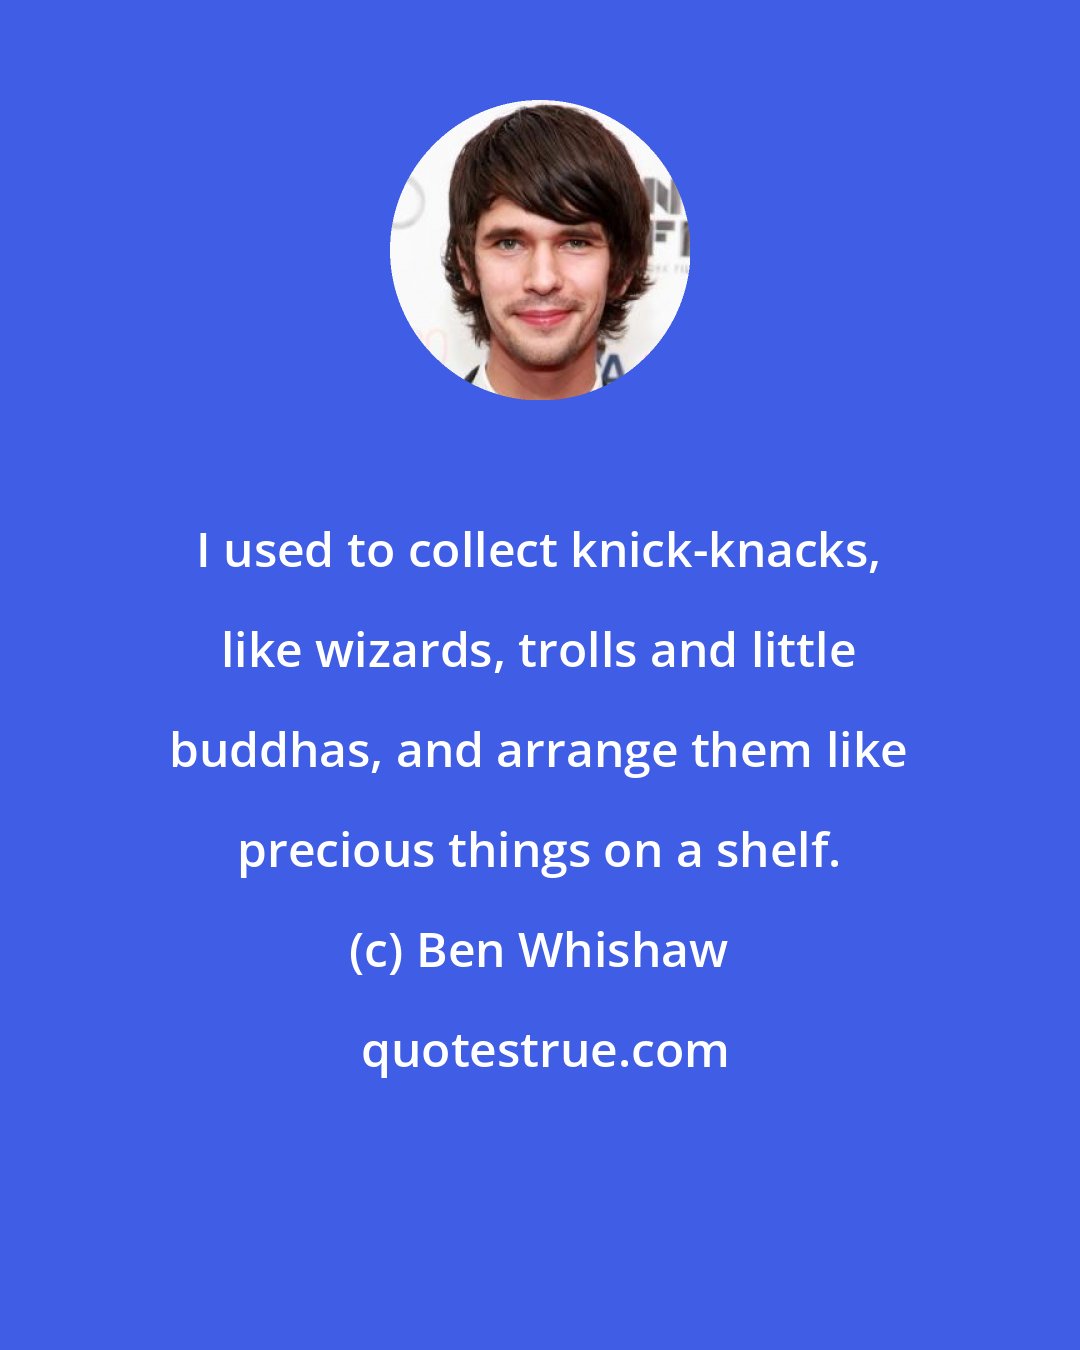 Ben Whishaw: I used to collect knick-knacks, like wizards, trolls and little buddhas, and arrange them like precious things on a shelf.